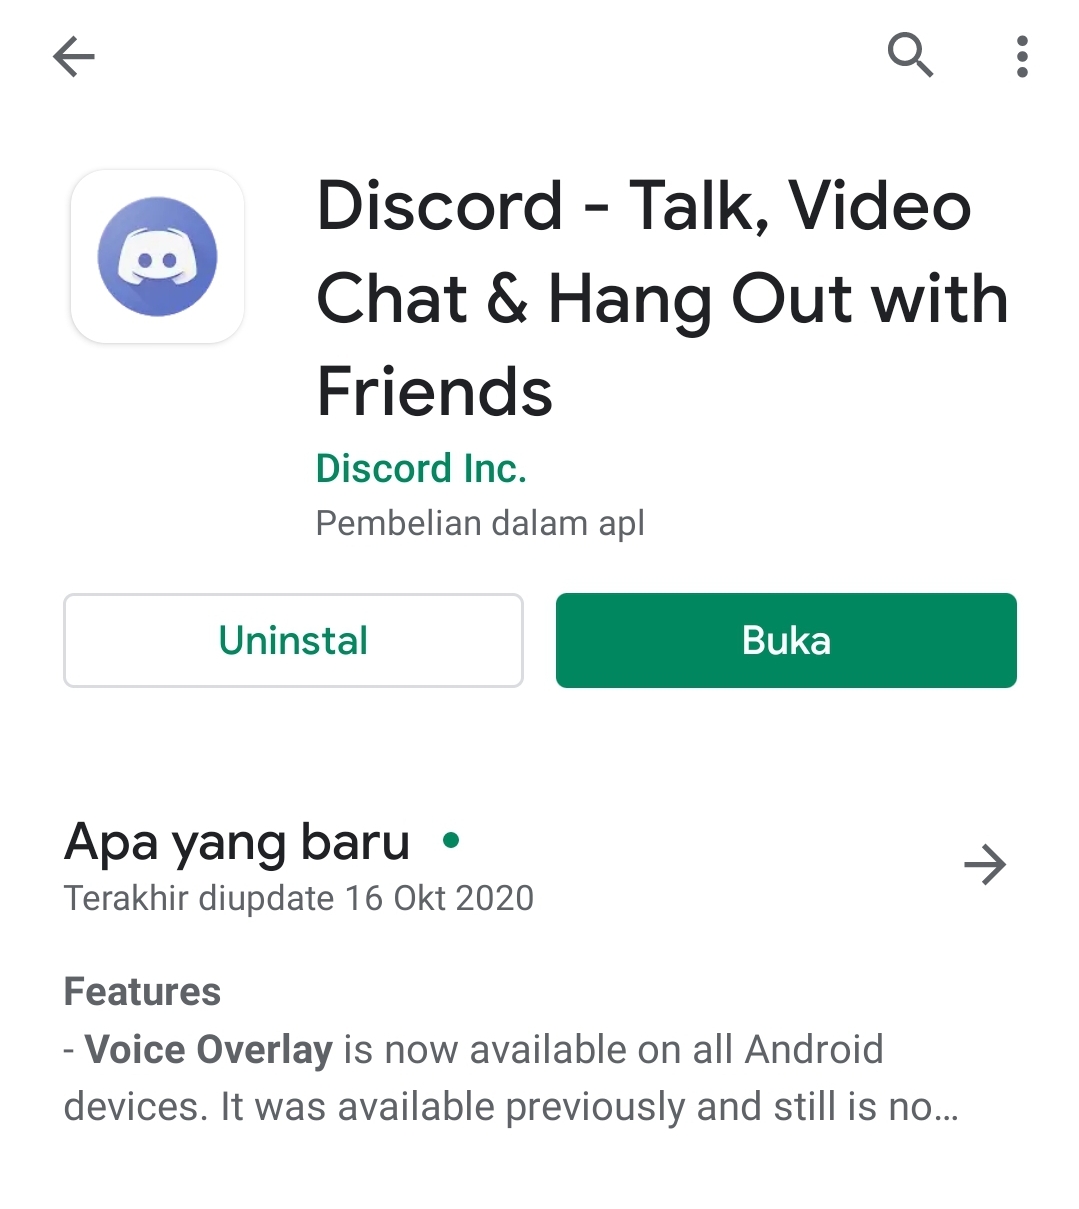 How to use Discord for PUBG mobile players